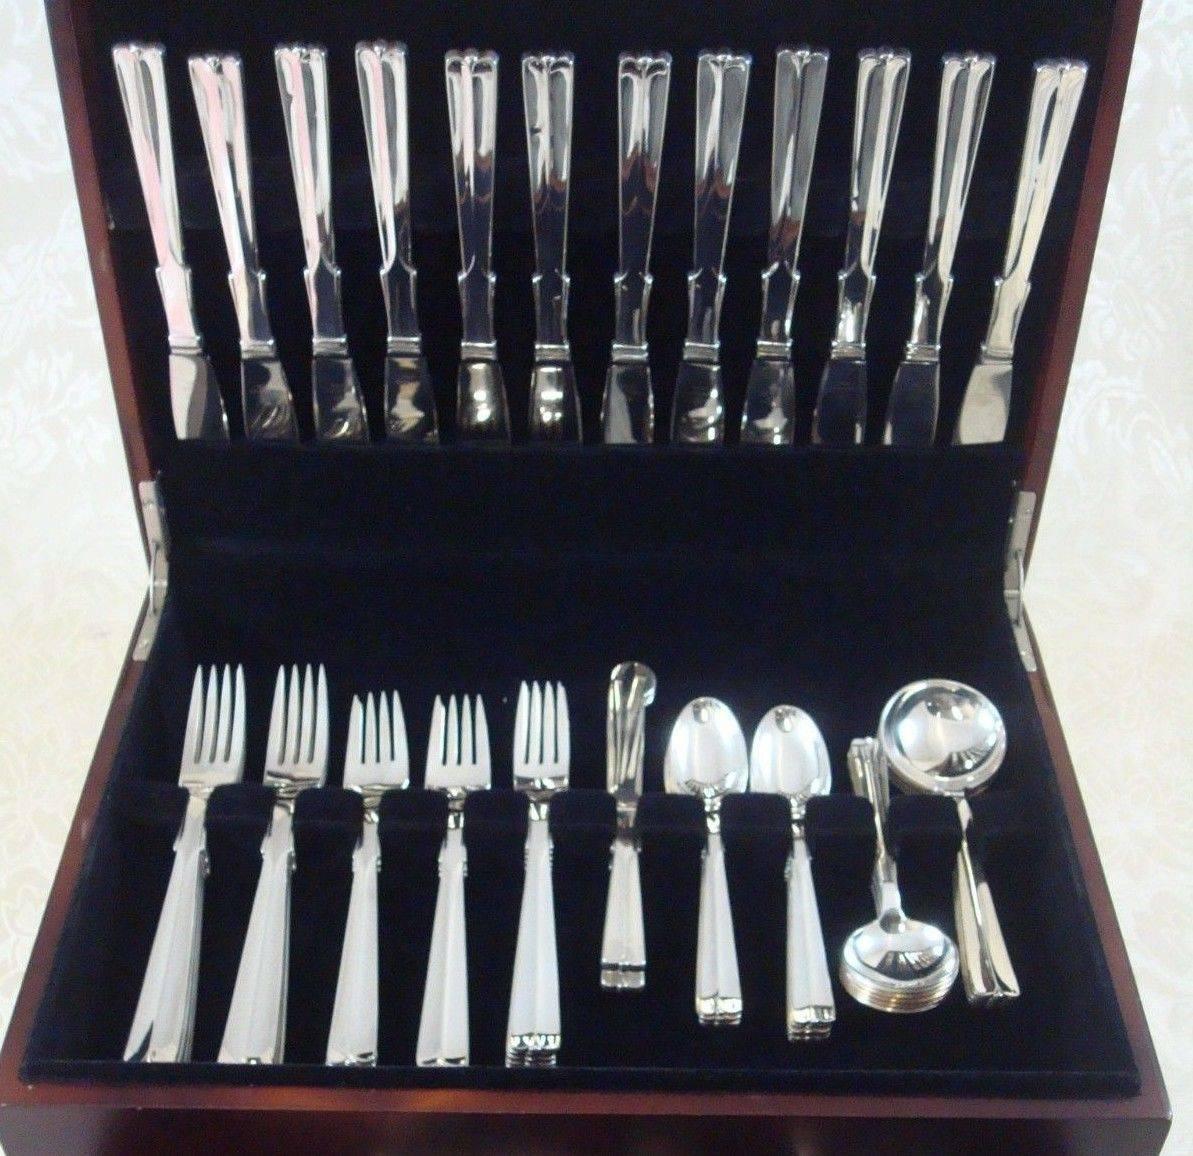 Baronet aka Arvesolv #7 by hans hansen sterling silver flatware set of 96 pieces. This pattern has a simple design with fine lines and bead-like detail on the tip of the handle. This set includes:

12 knives, long handle, 8 3/4